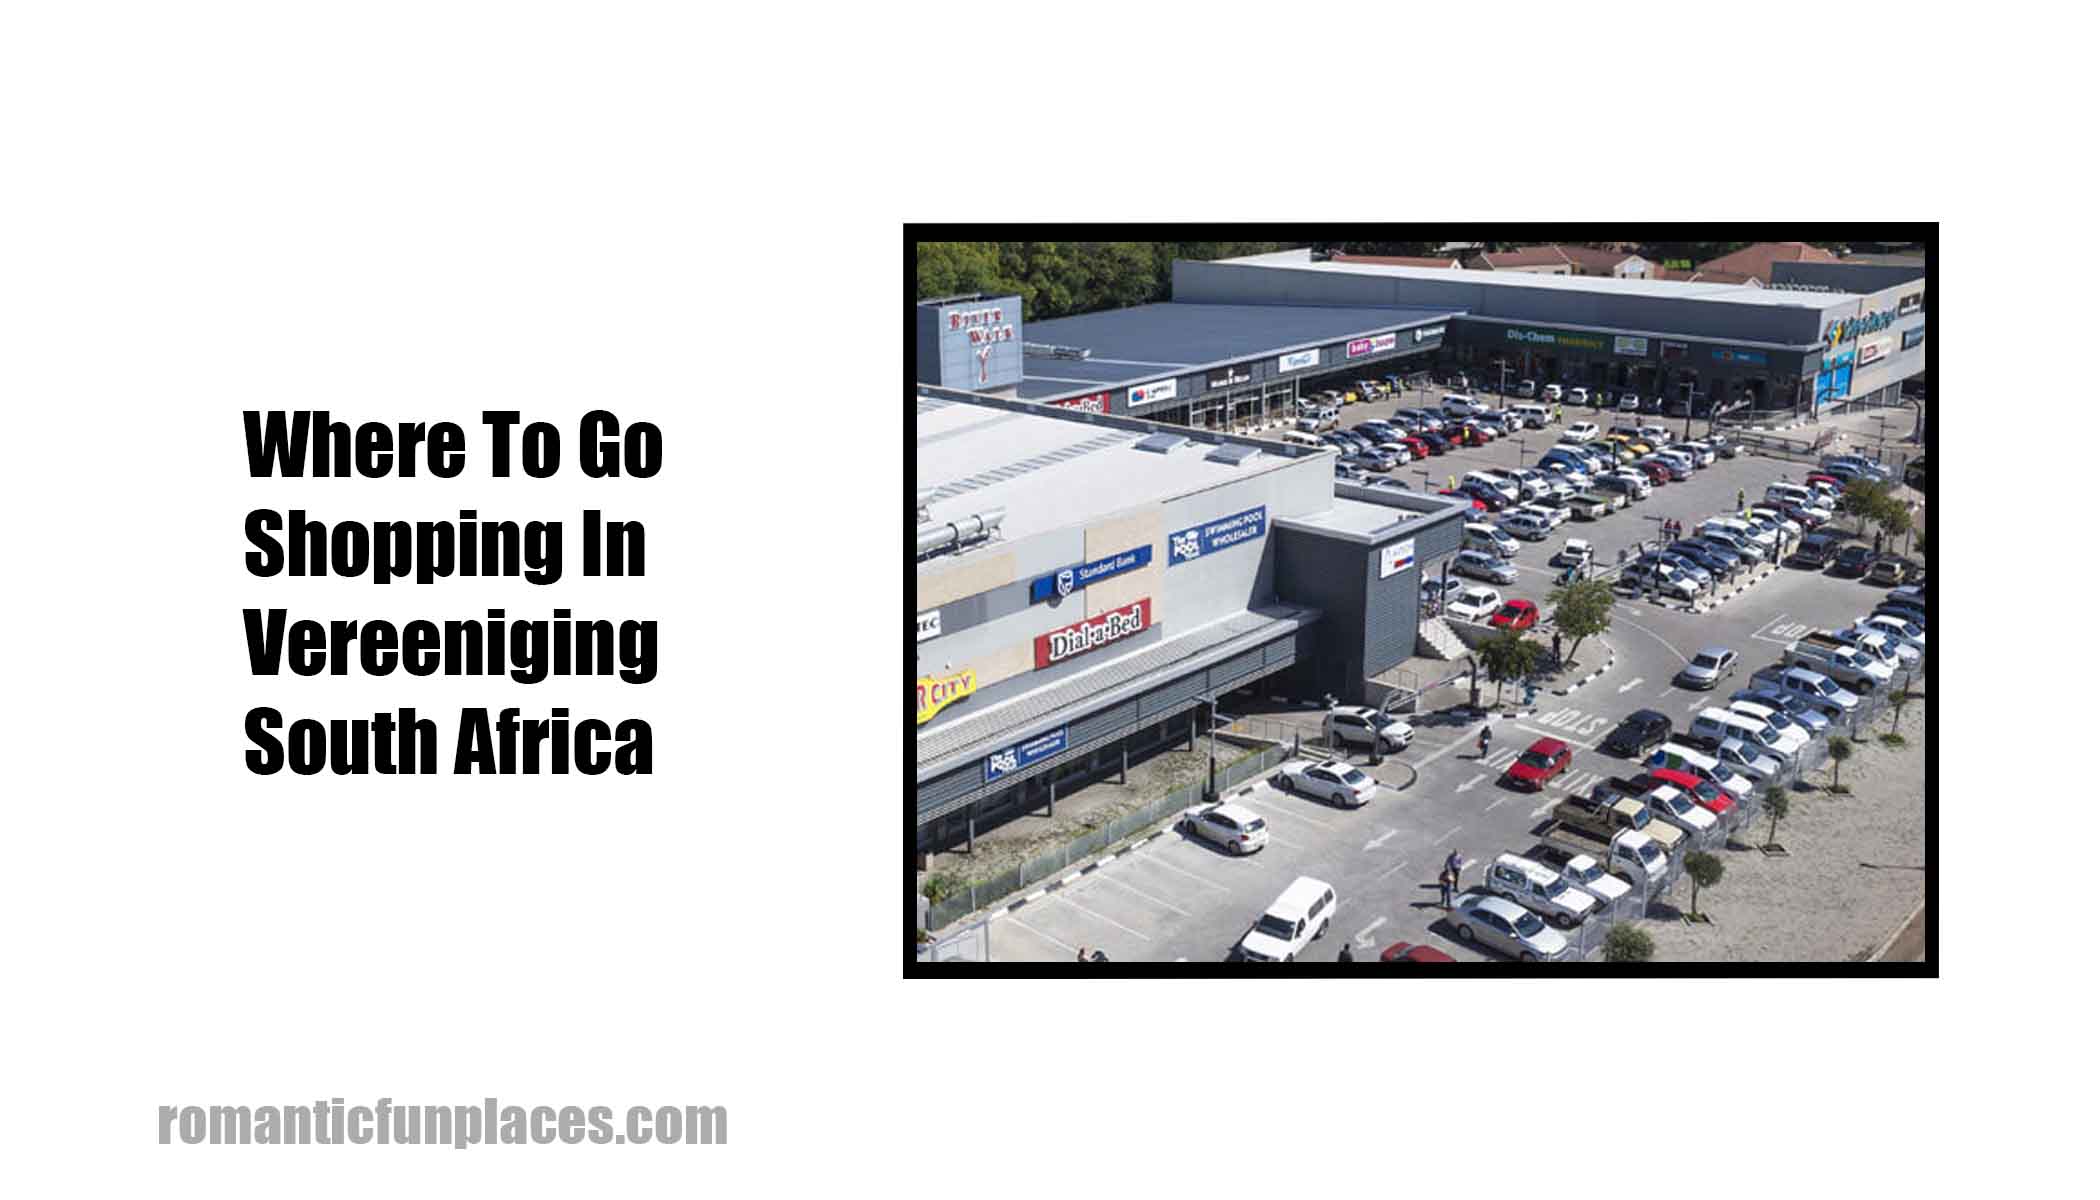 Where To Go Shopping In Vereeniging South Africa